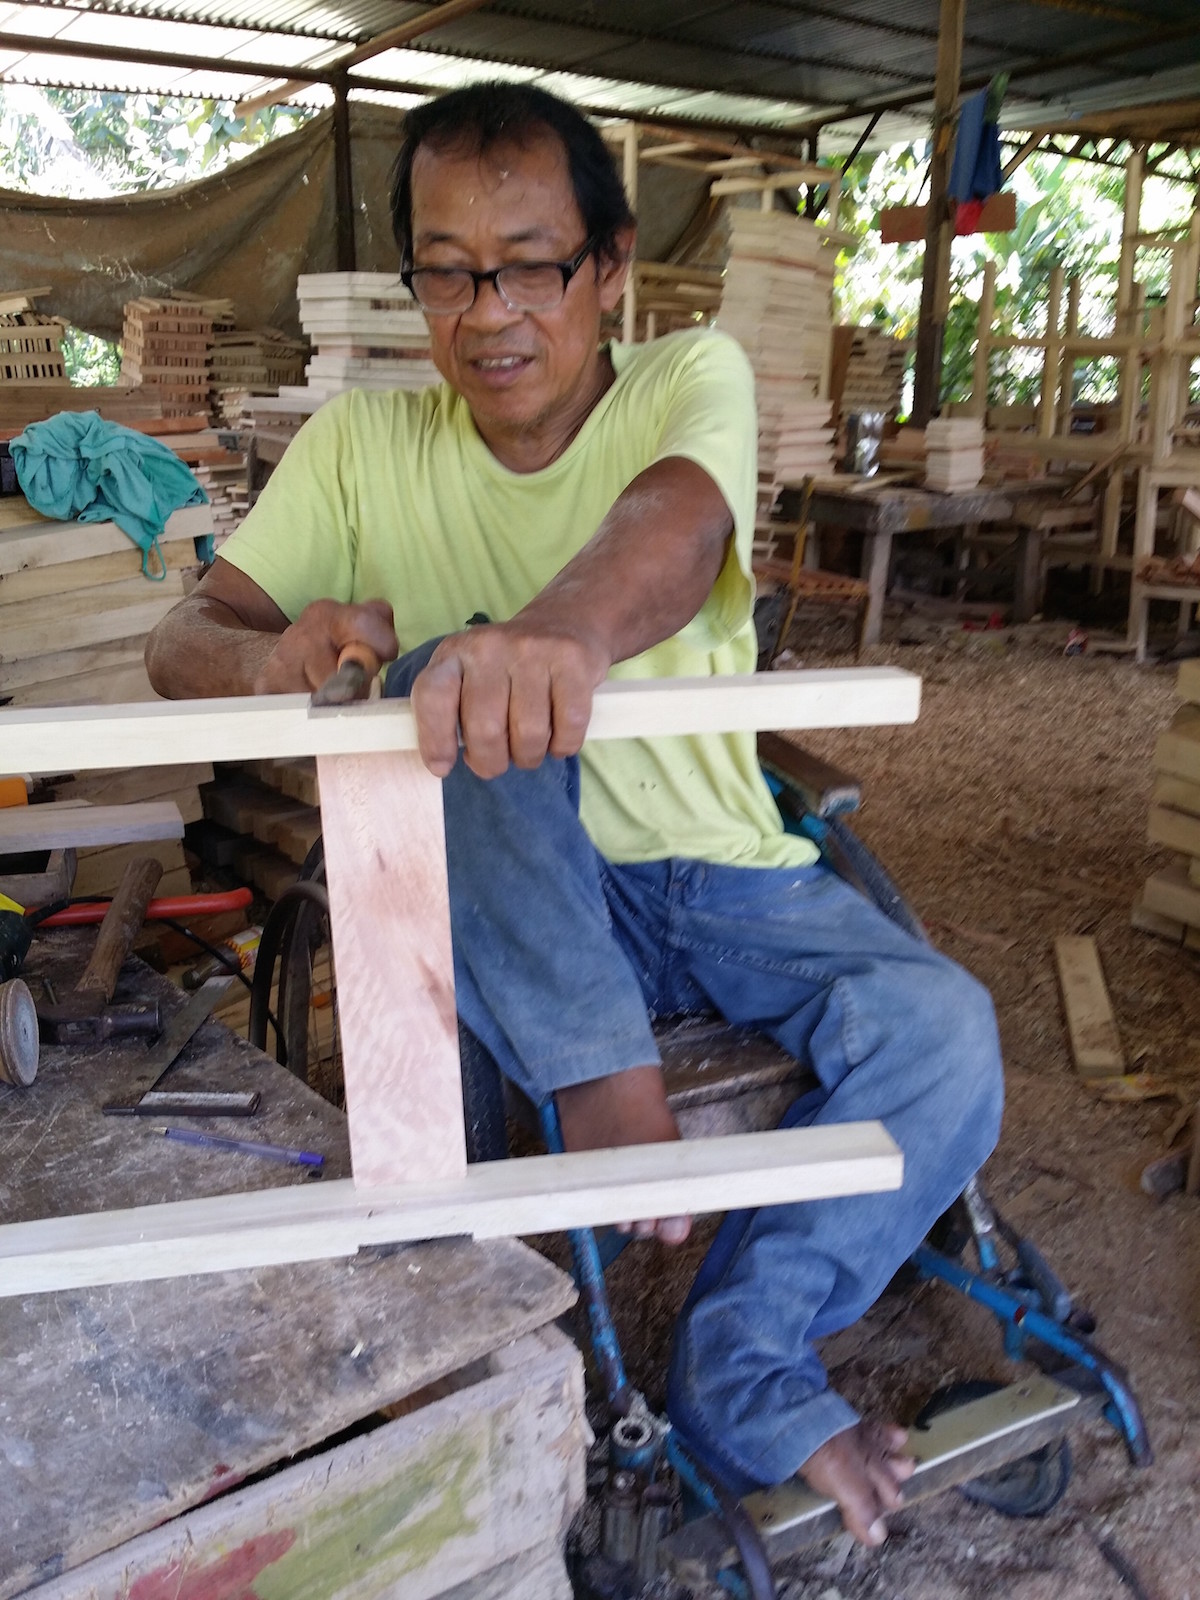 Wheelchair user Sofronio Floro is one of the homeowners in Davao City’s ADAP Village, a community of PWDs that provides livelihood opportunities for members through cooperativism. Photo by JOHN FRANCES C. FUENTES